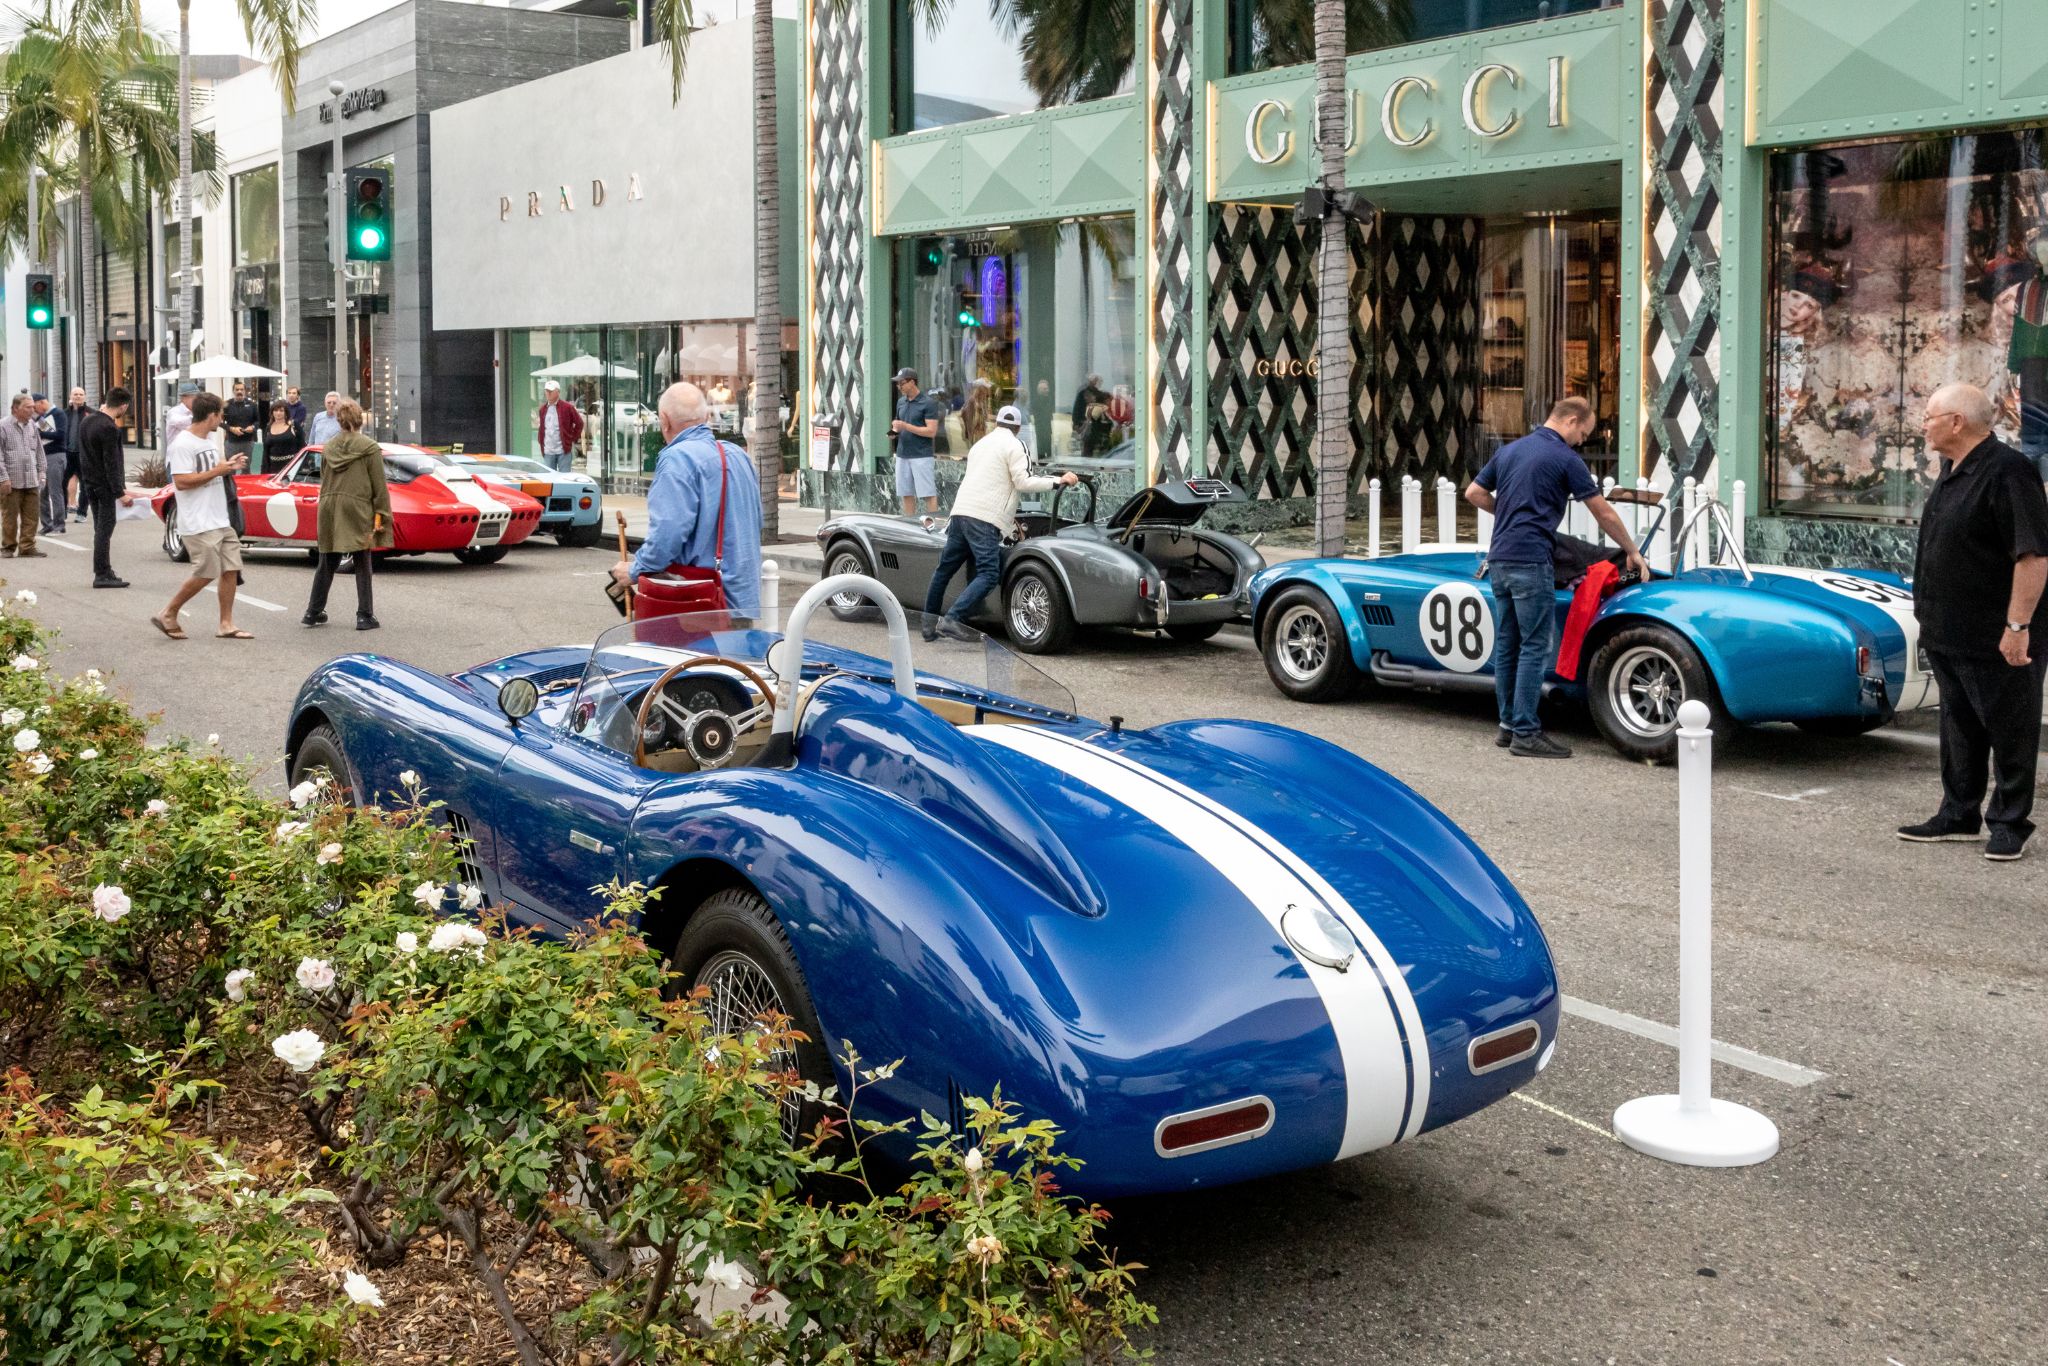 Rodeo Drive Concours d'Elegance Featured Over 100 Cars and 40,000 Visitors  on Father's Day